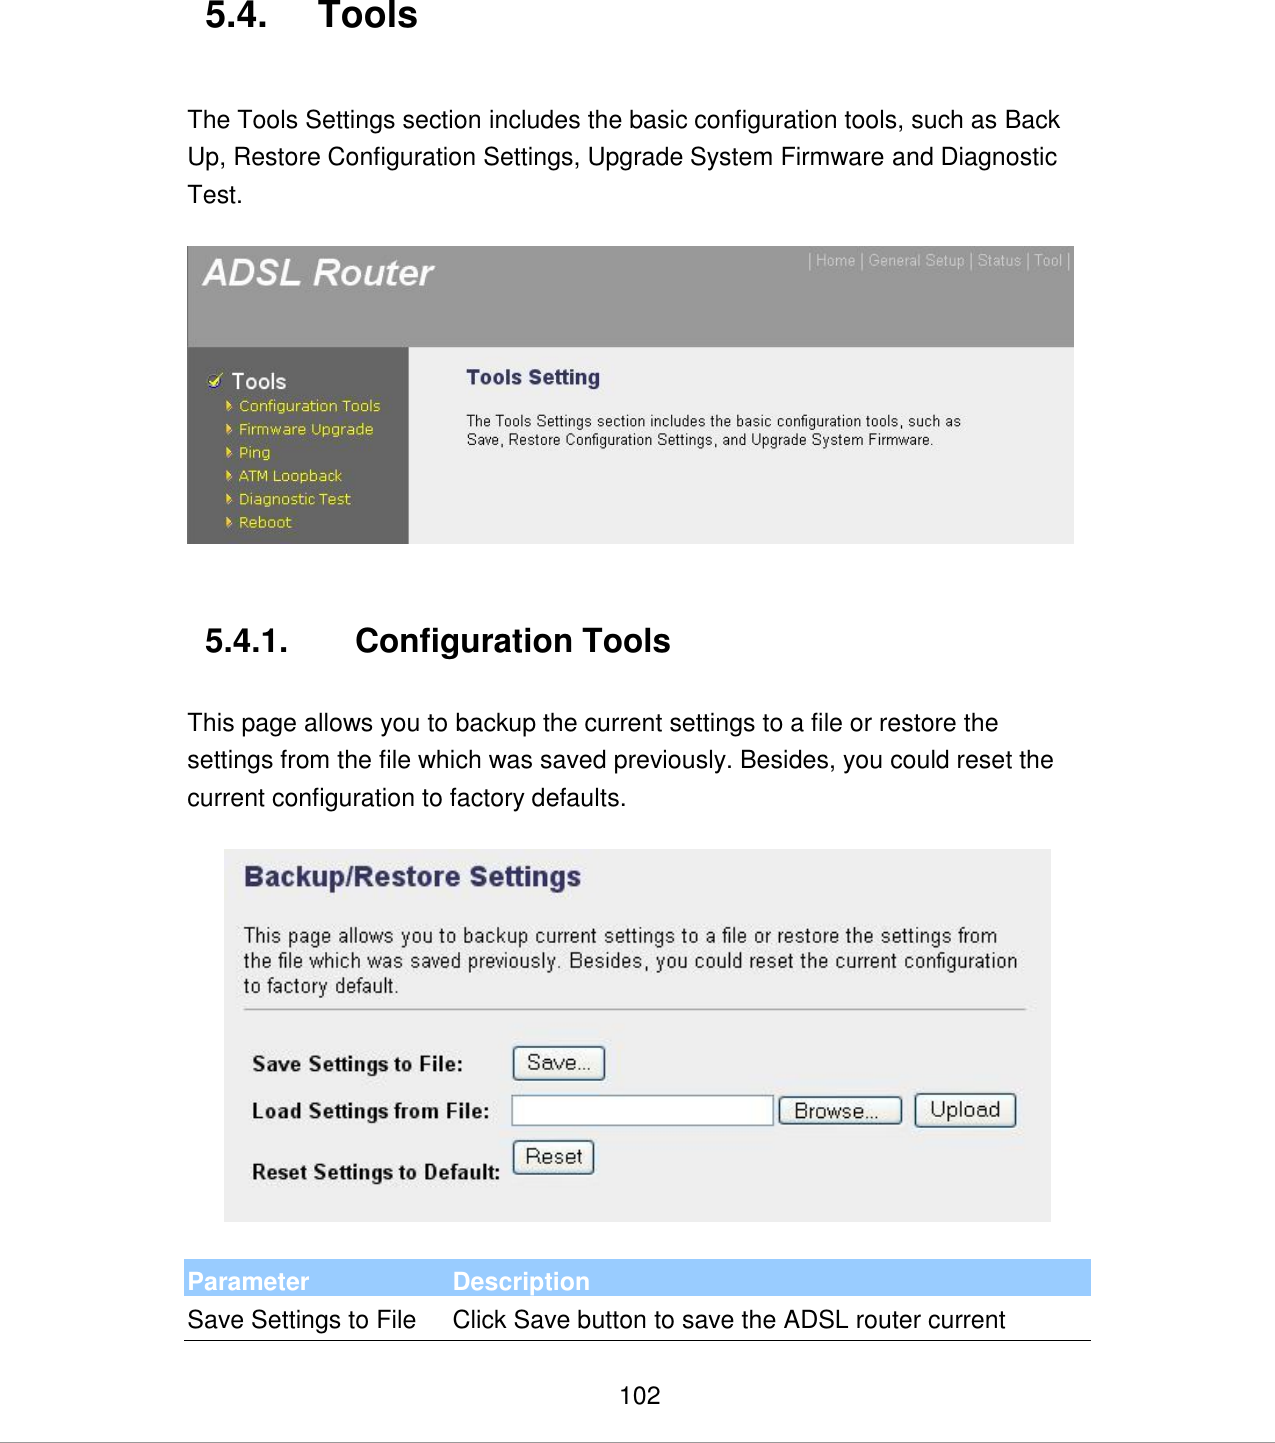   102 5.4.  Tools  The Tools Settings section includes the basic configuration tools, such as Back Up, Restore Configuration Settings, Upgrade System Firmware and Diagnostic Test.     5.4.1.  Configuration Tools  This page allows you to backup the current settings to a file or restore the settings from the file which was saved previously. Besides, you could reset the current configuration to factory defaults.     Parameter Description Save Settings to File Click Save button to save the ADSL router current 